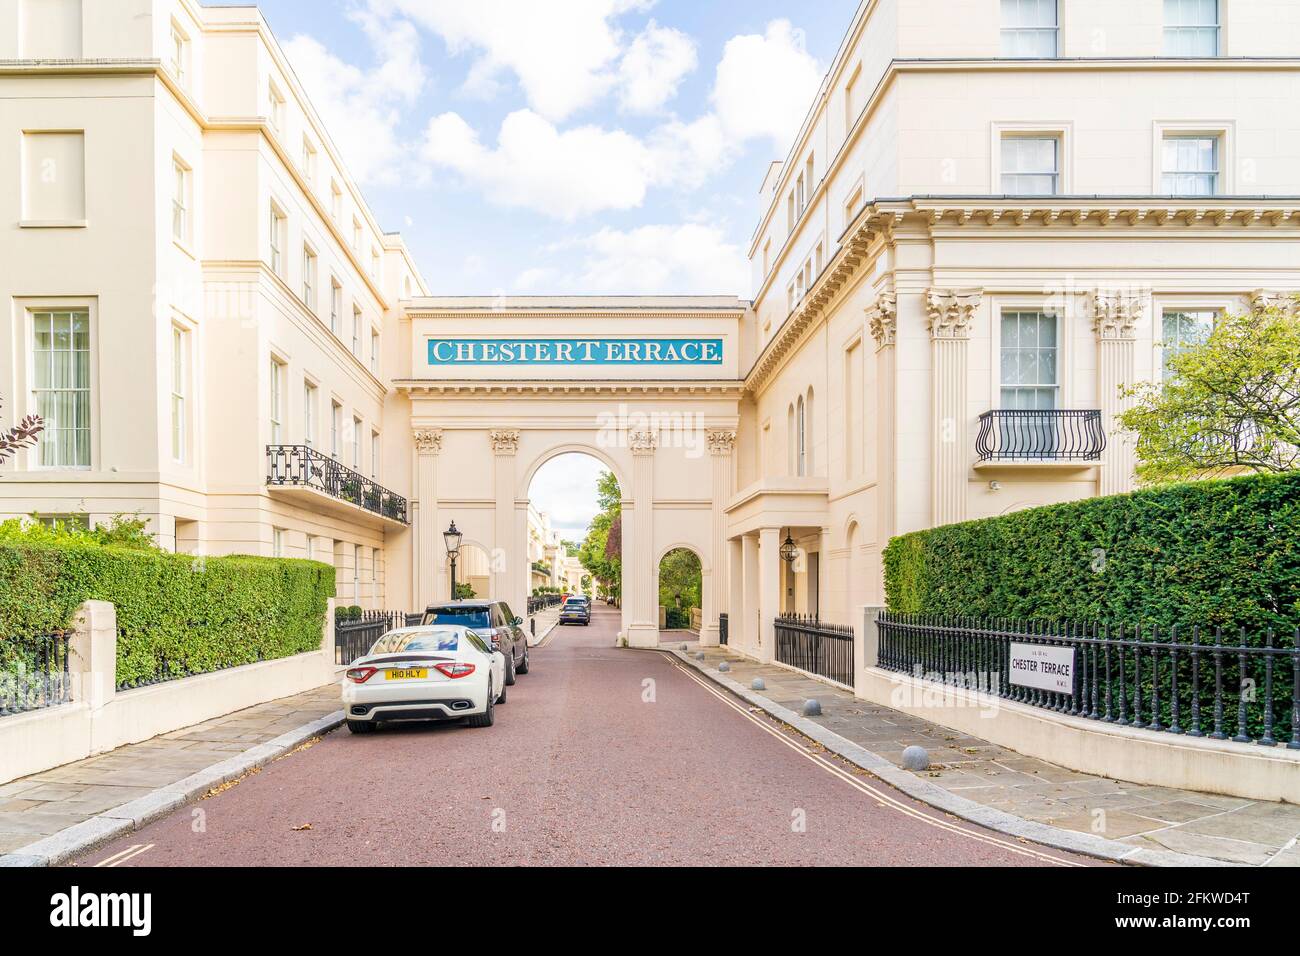 July 2020. London. Chester Terrace architecture in Regents park in London, England Stock Photo